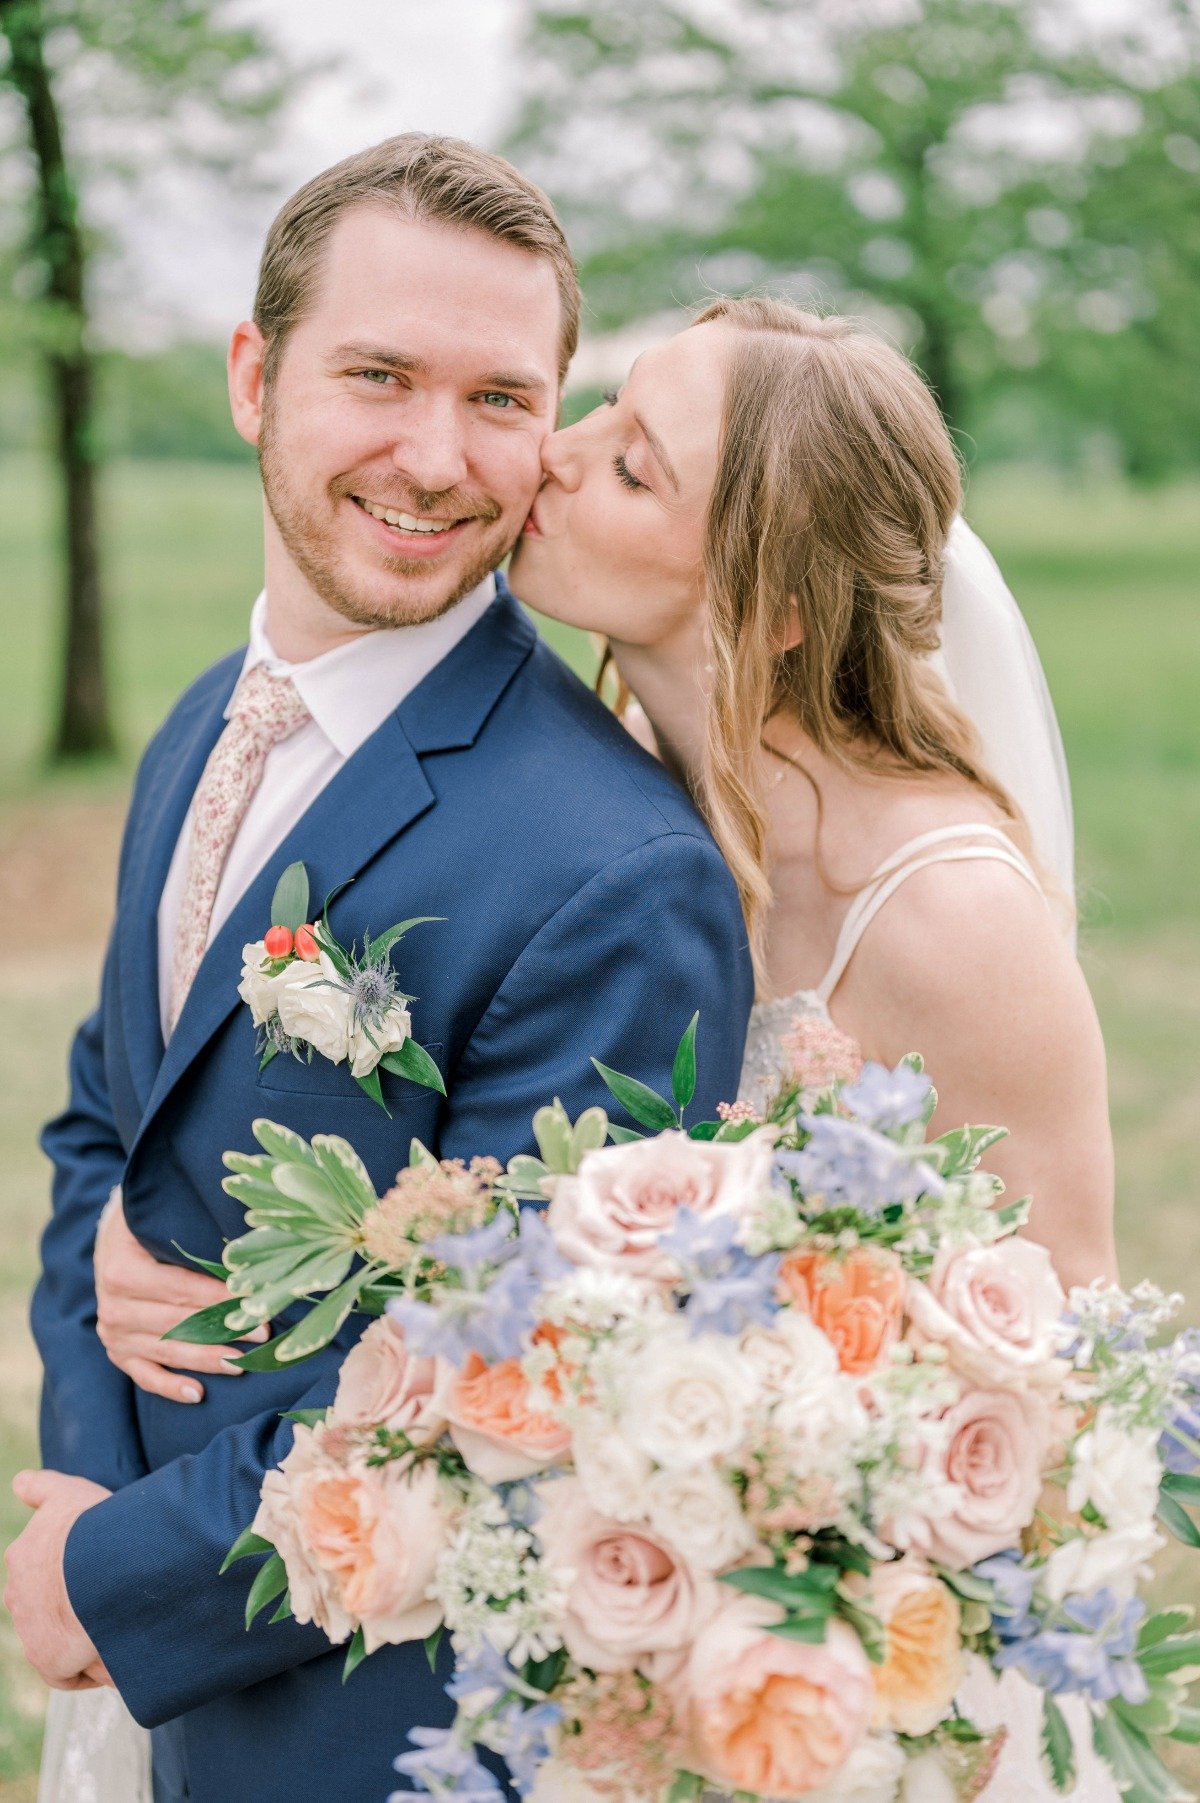 This Clara Joyce Flowers Wedding Was Filled to the Brim With Florals